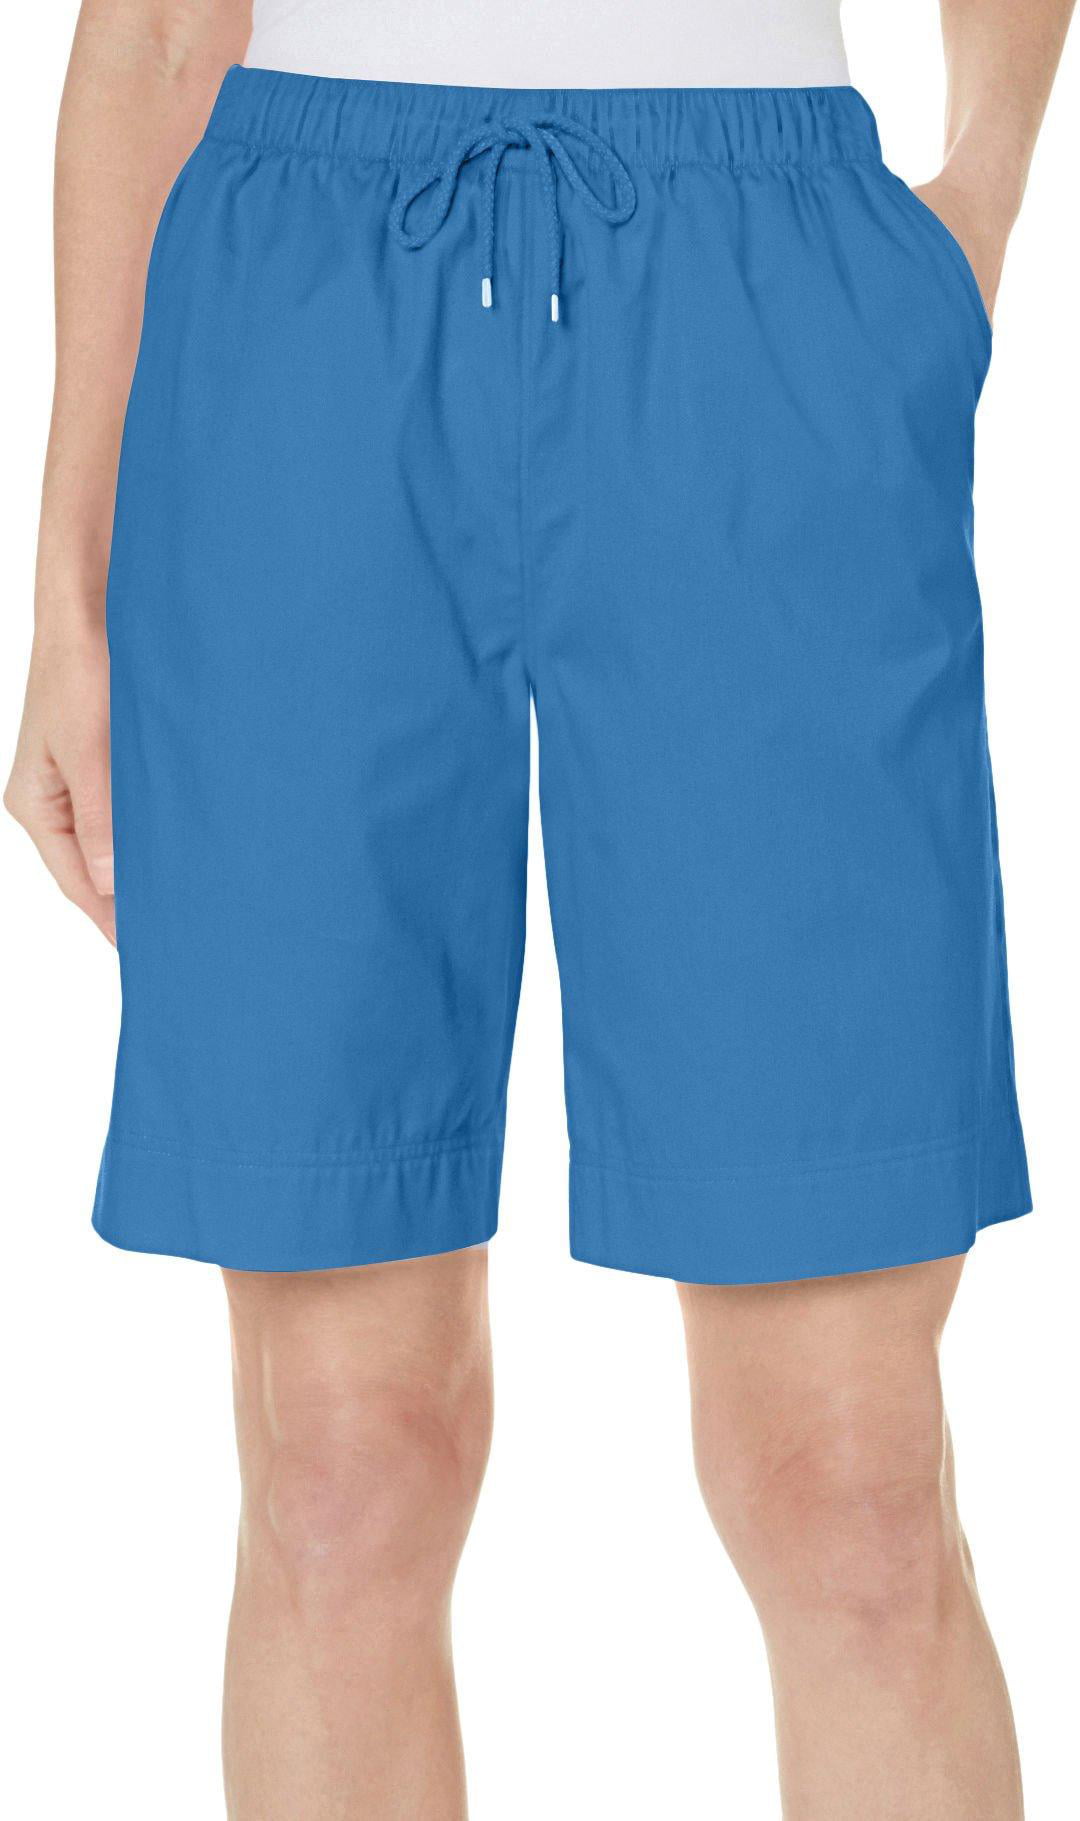 Coral Bay Petite The Everyday Solid Drawstring Twill Shorts 